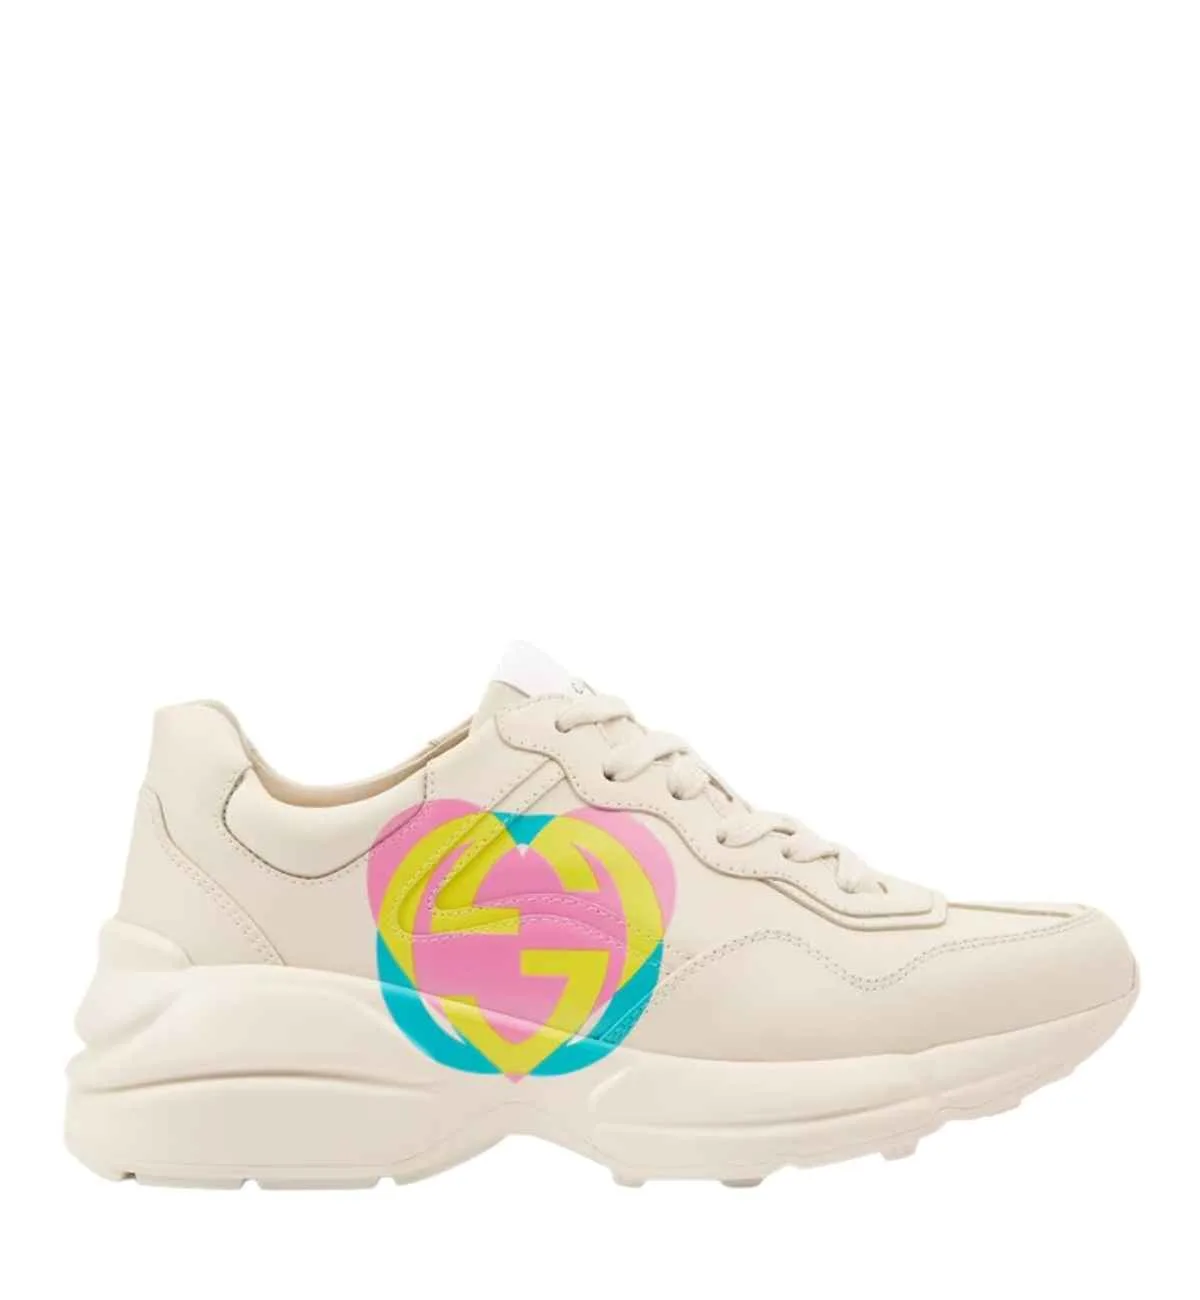 Off-white heart sneaker with pink yellow and blue heart shaped embroidery on the side on white background.